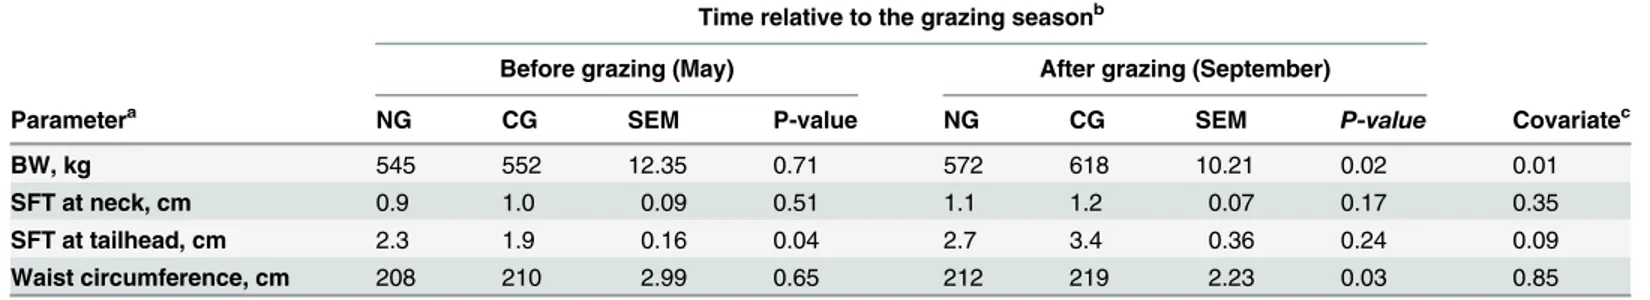 Table 2. Effect of pasture type on body measurements of Finnhorse mares.